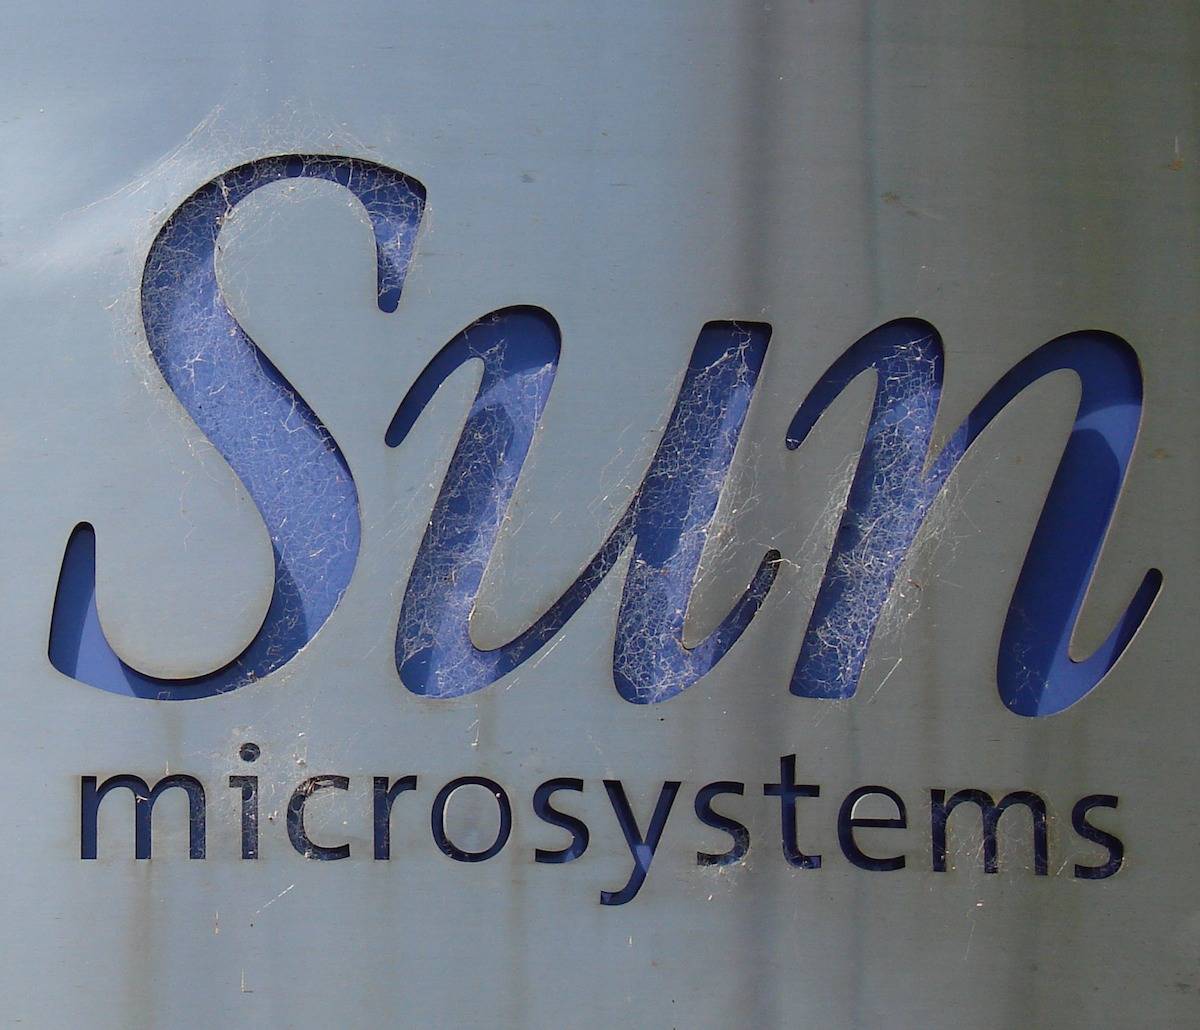 Sun Microsystems was a major Silicon Valley player back in the day.